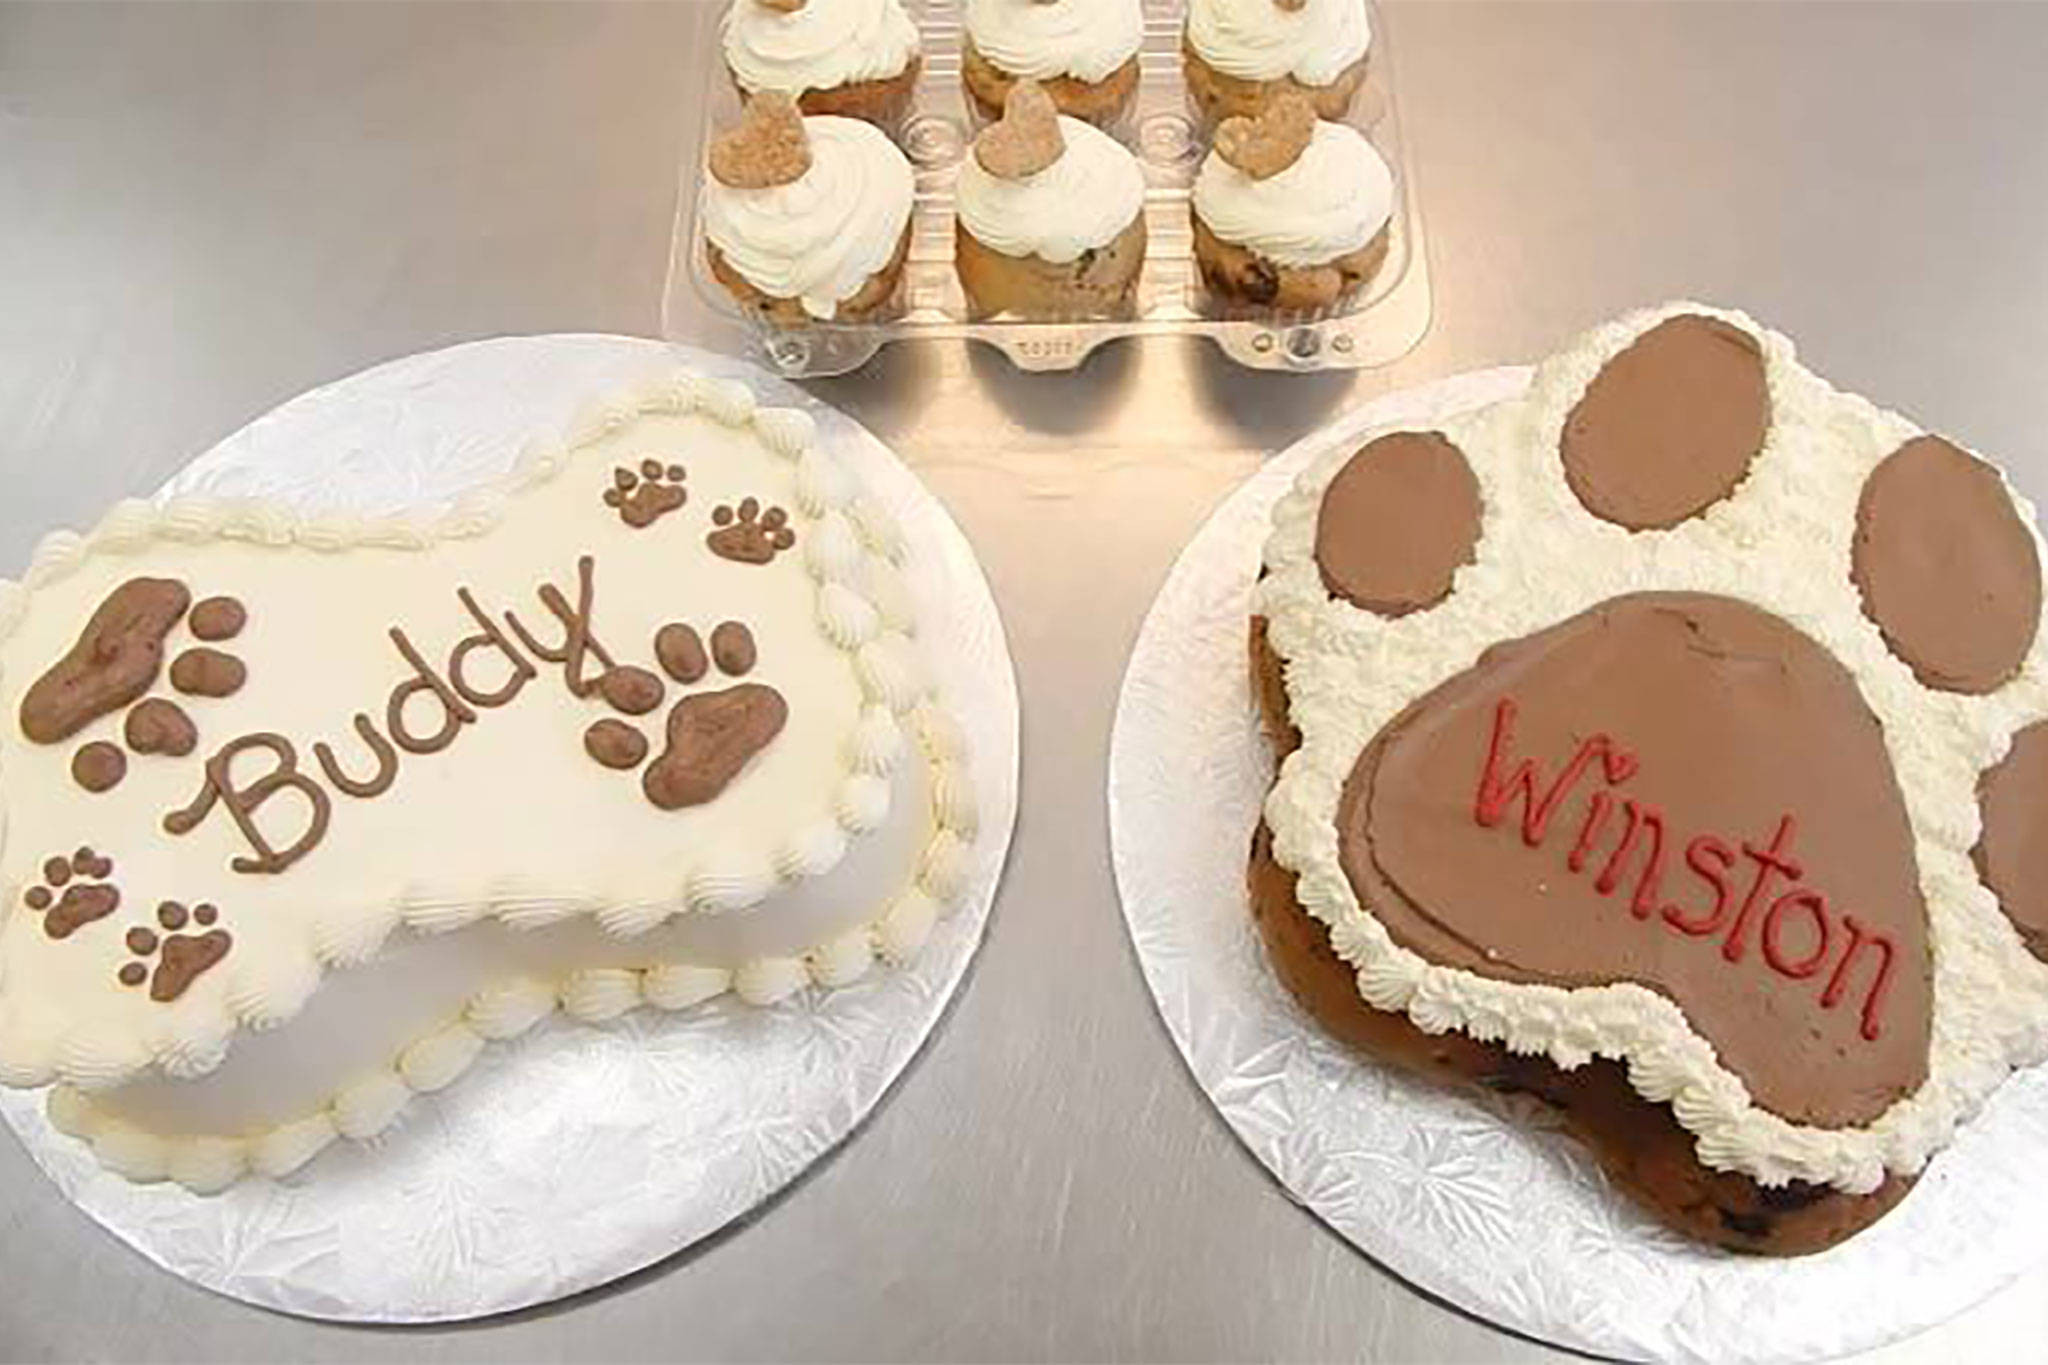 How To Make A Birthday Cake For A Dog
 Toronto can t stop ing cakes and cupcakes for their dogs